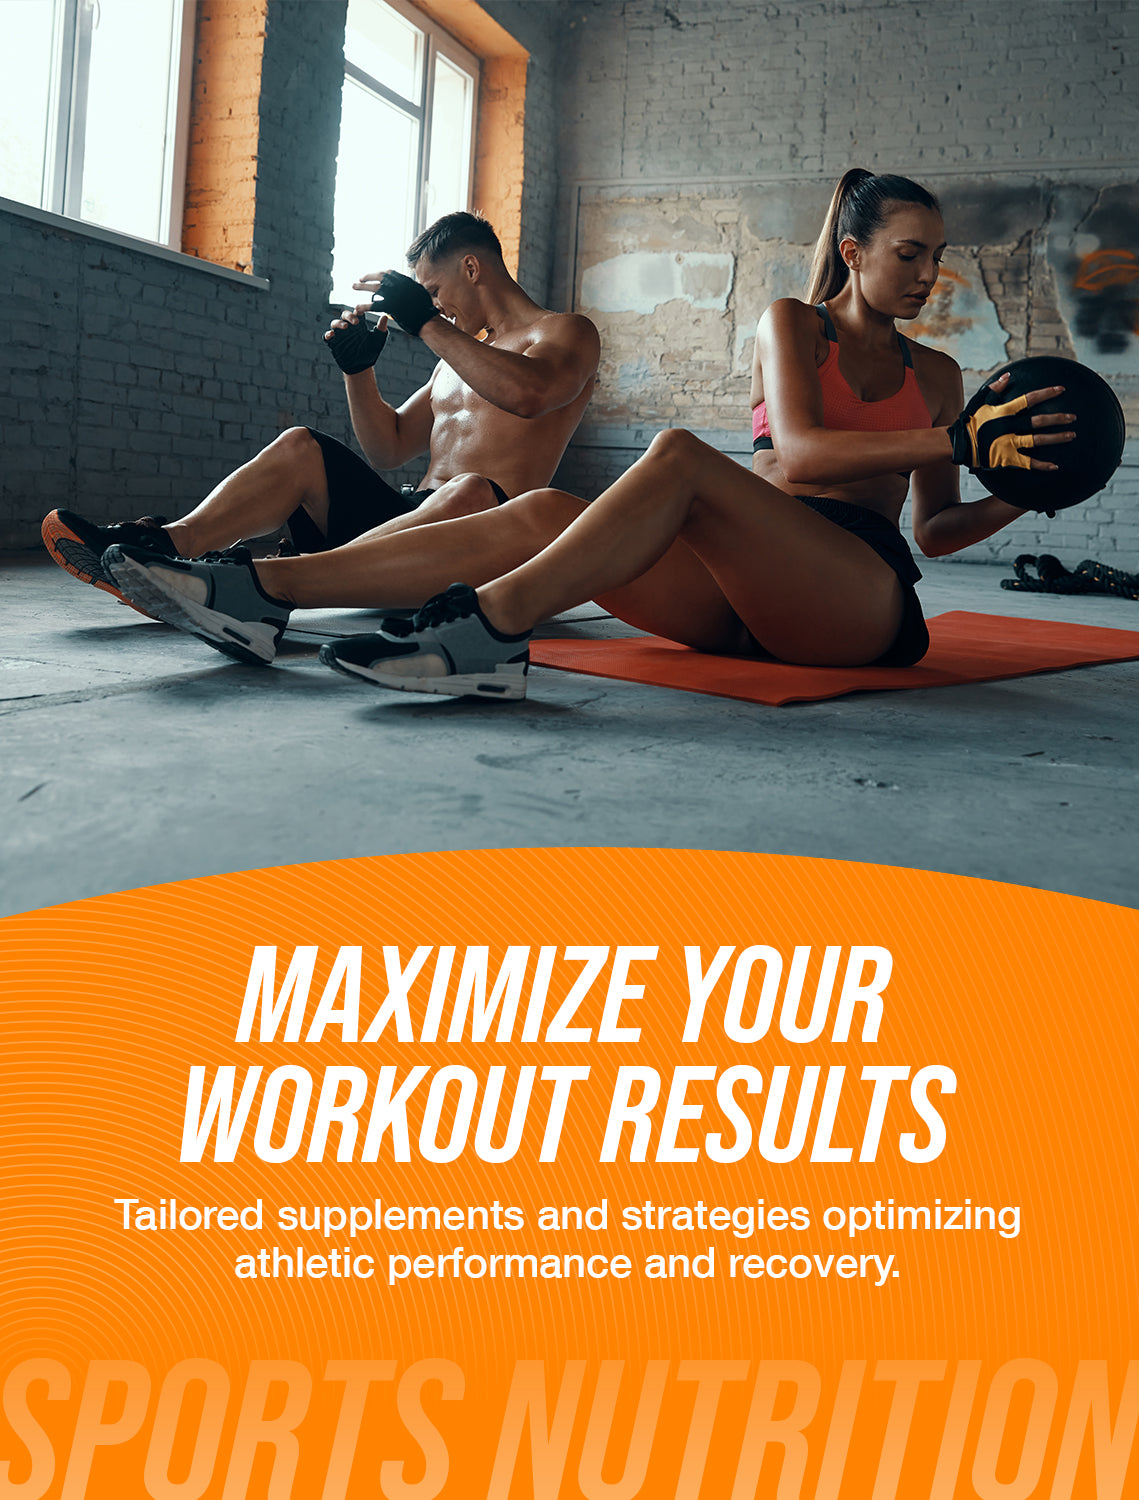 Workout supplements category image